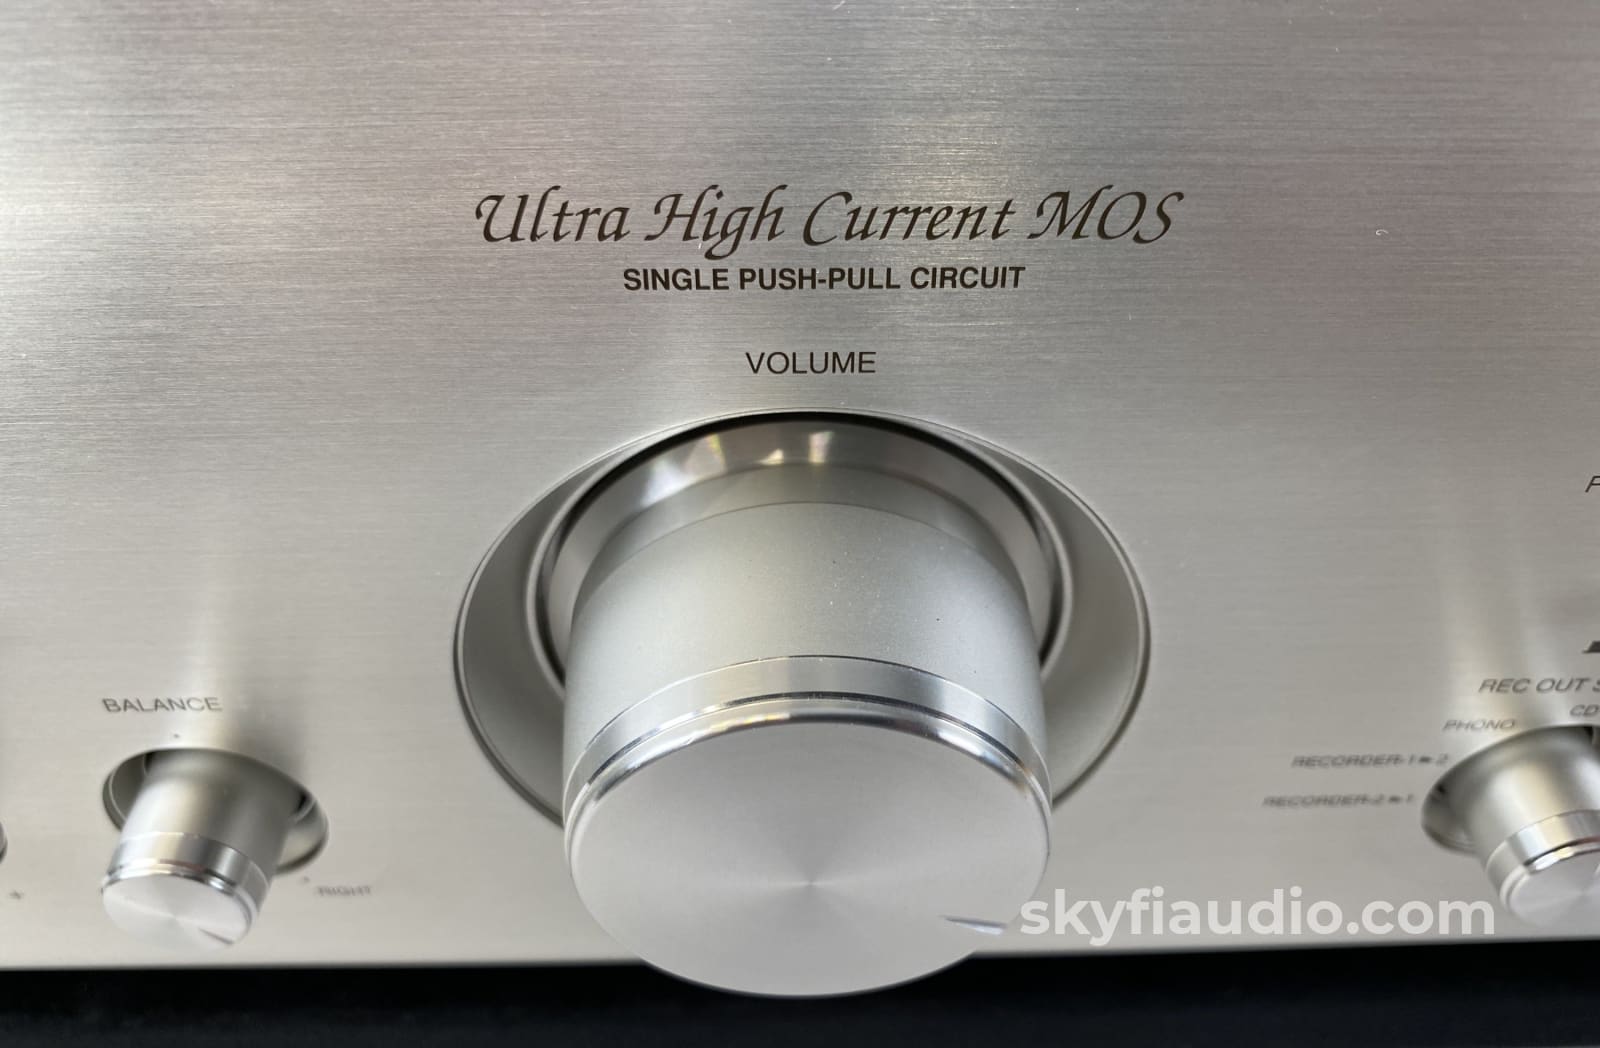 Denon Pma-1500Se Integrated Amplifier With Mm Or Mc Phono Input